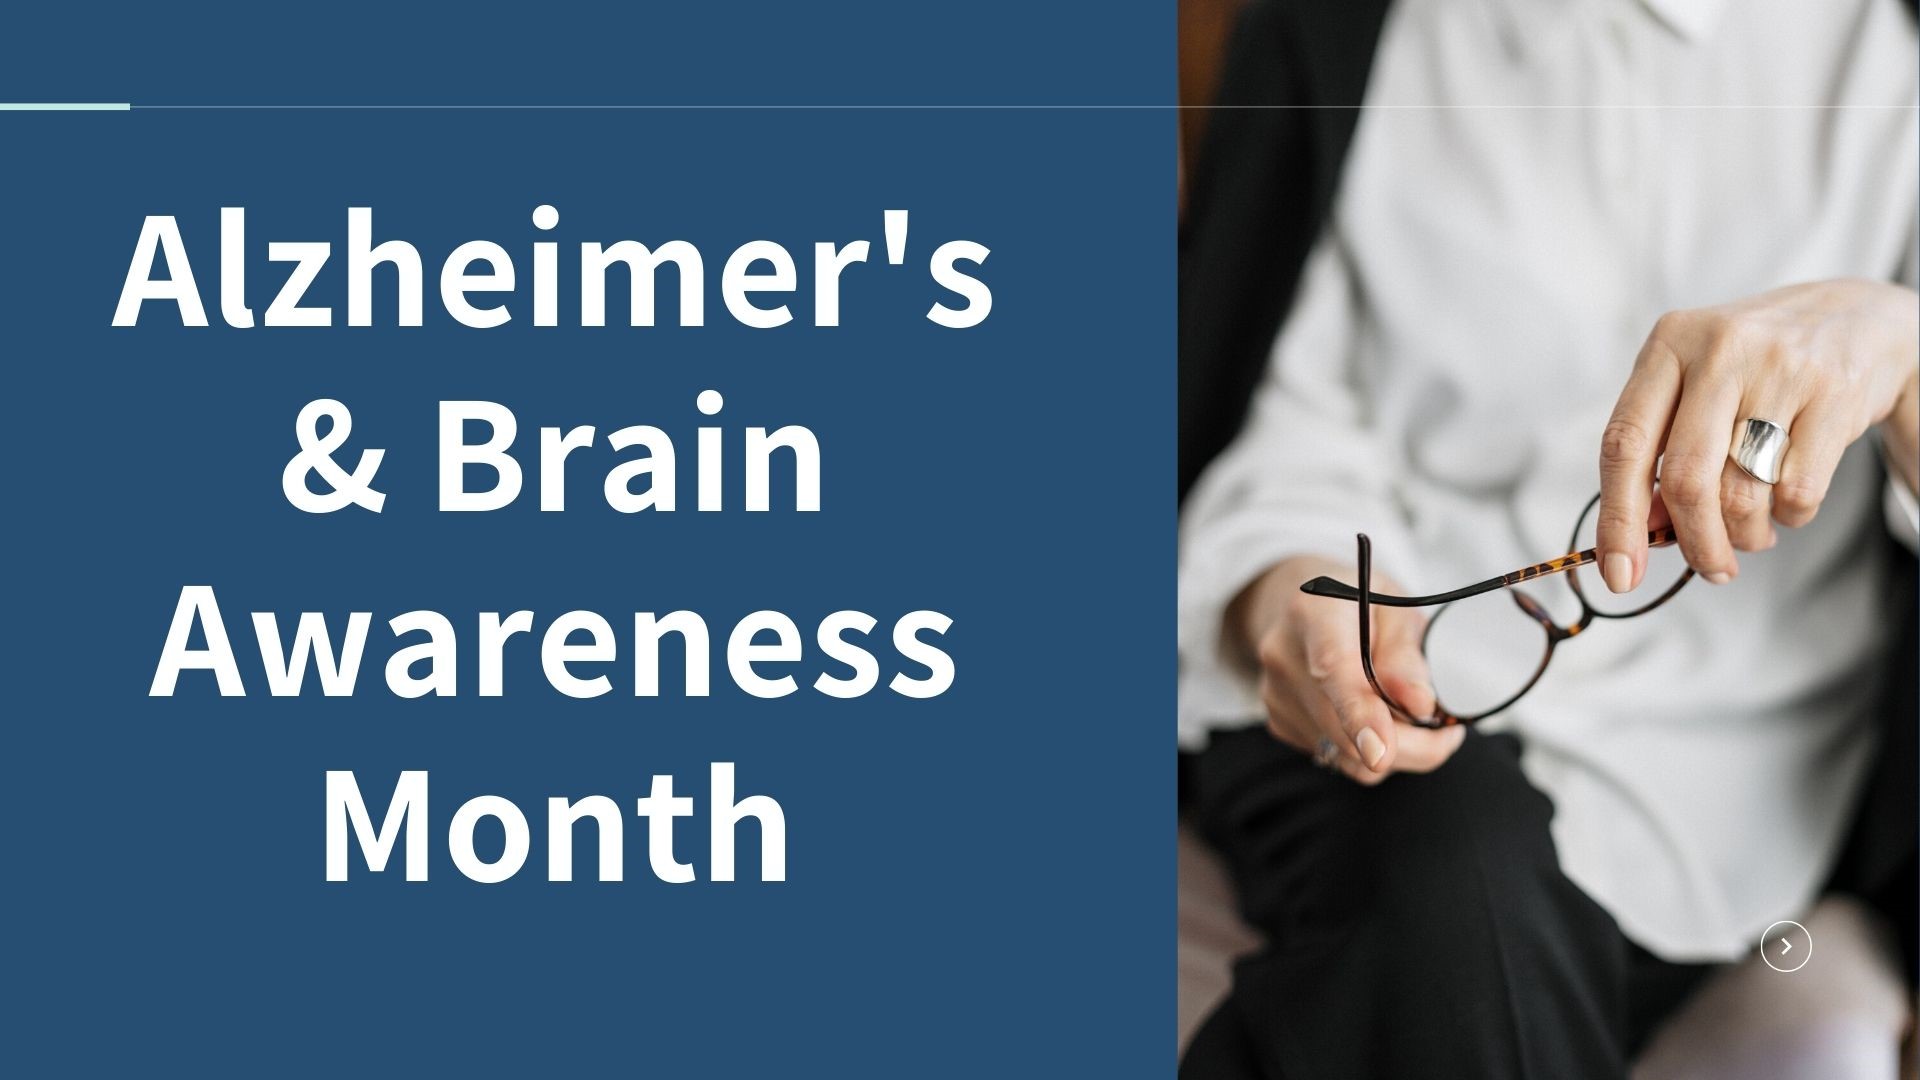 A closer look at the impact of Alzheimer's disease on patients, loved ones and caregivers, as well as a look at what you can do now to help your brain health